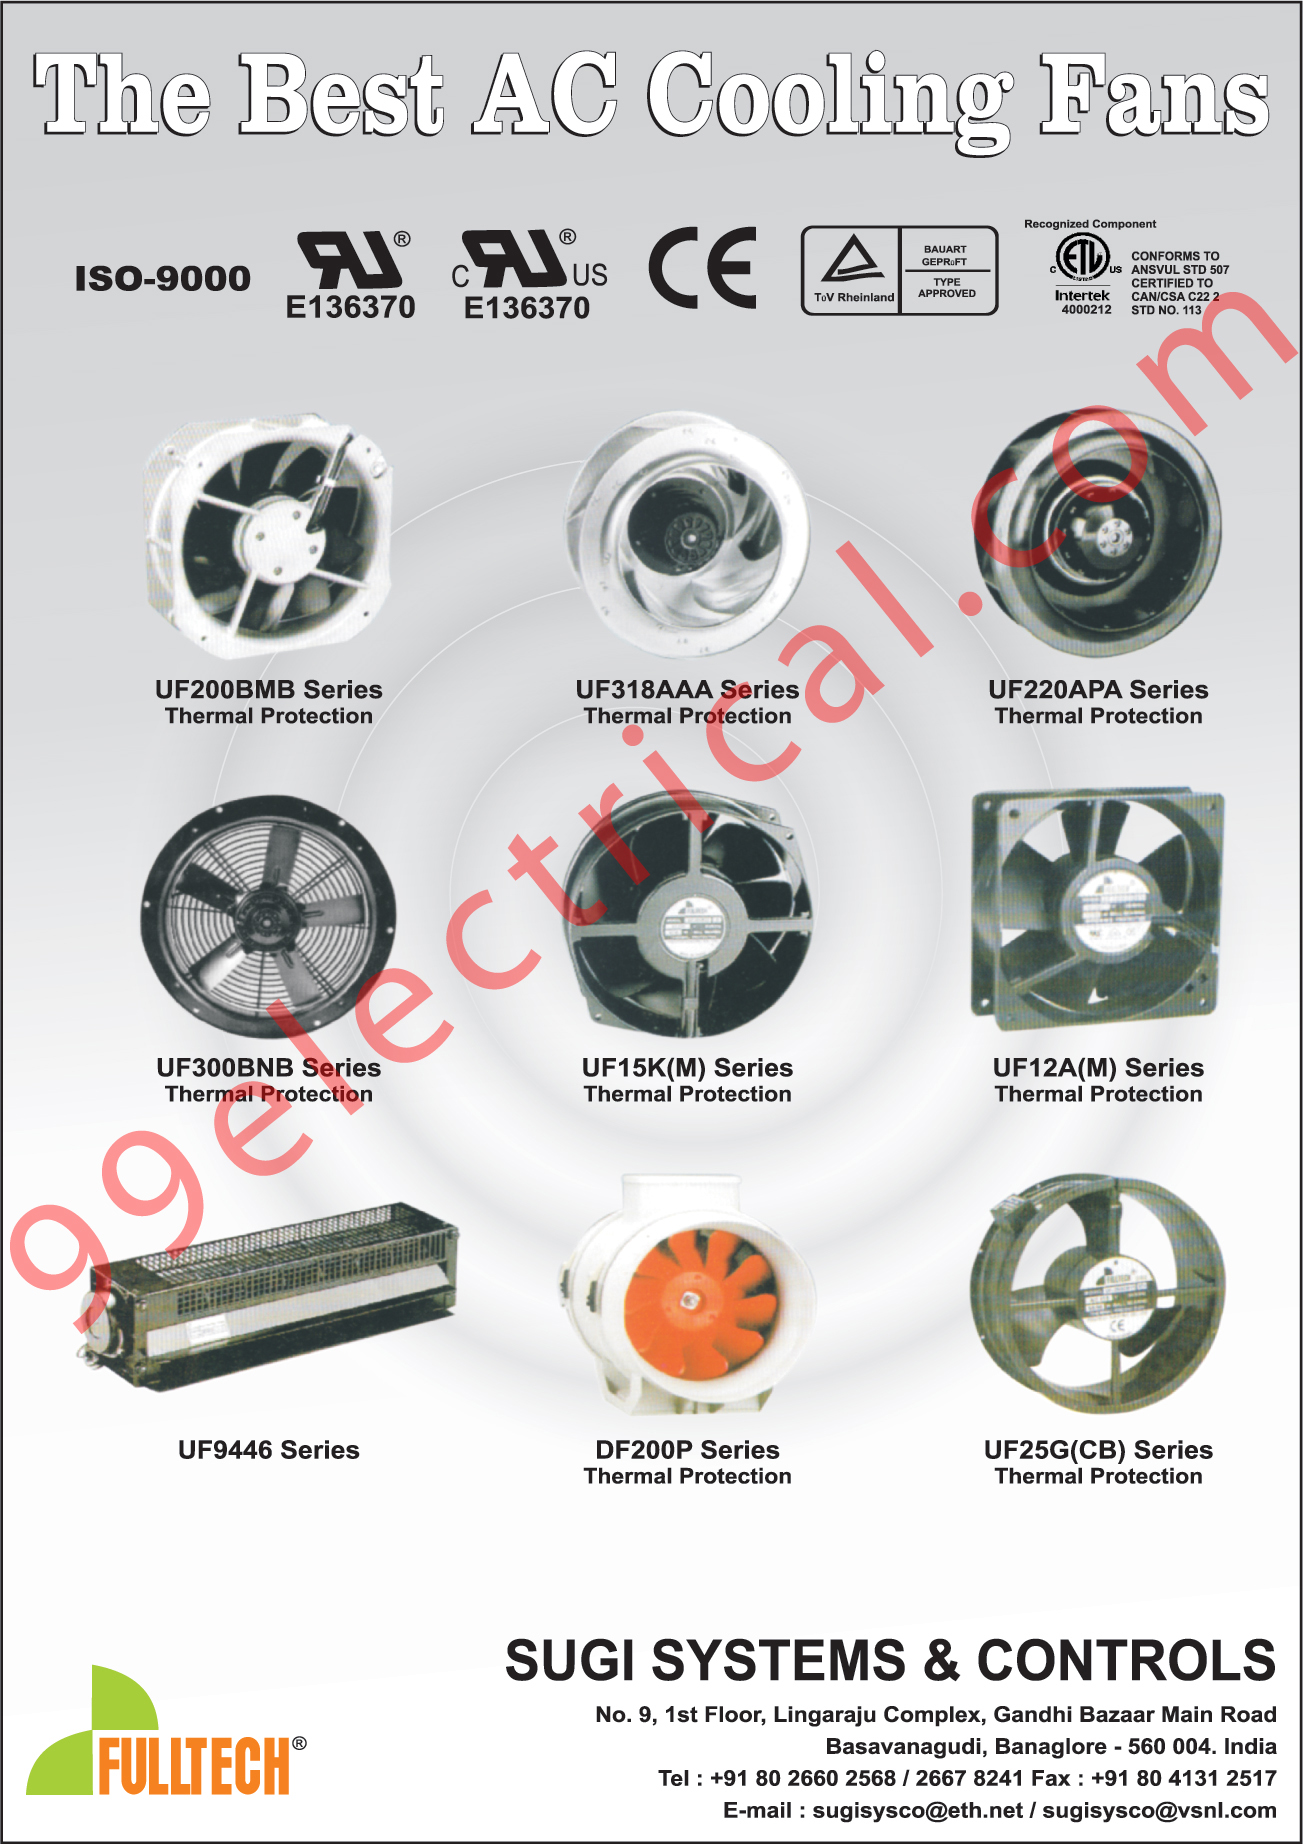 AC Cooling Fans, Thermal Protection, Fans, Electrical Goods, Wire, Cables, Switches, Connectors, MCB Contactor, Electronic Items, Electrical Fans